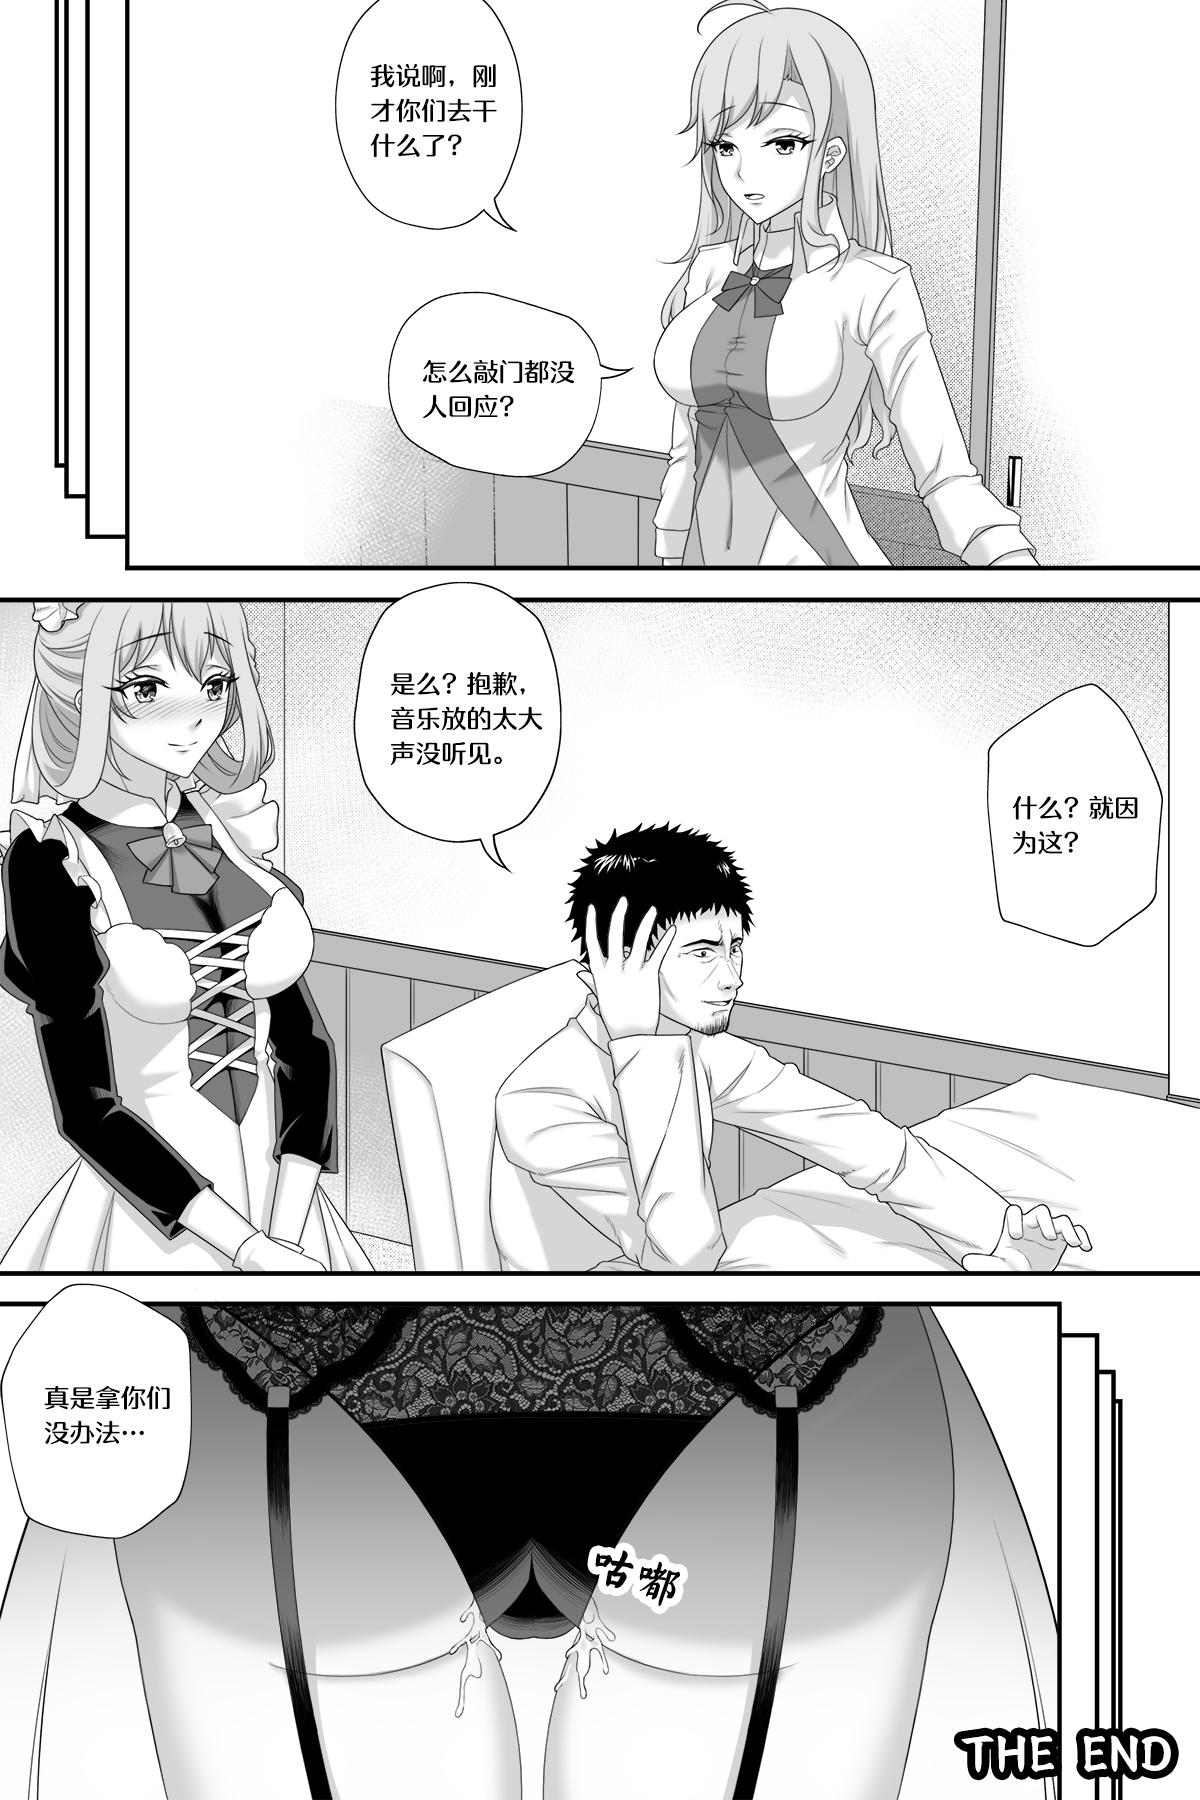 Shaven 花女仆的侍奉 - Warship girls Young Old - Page 12